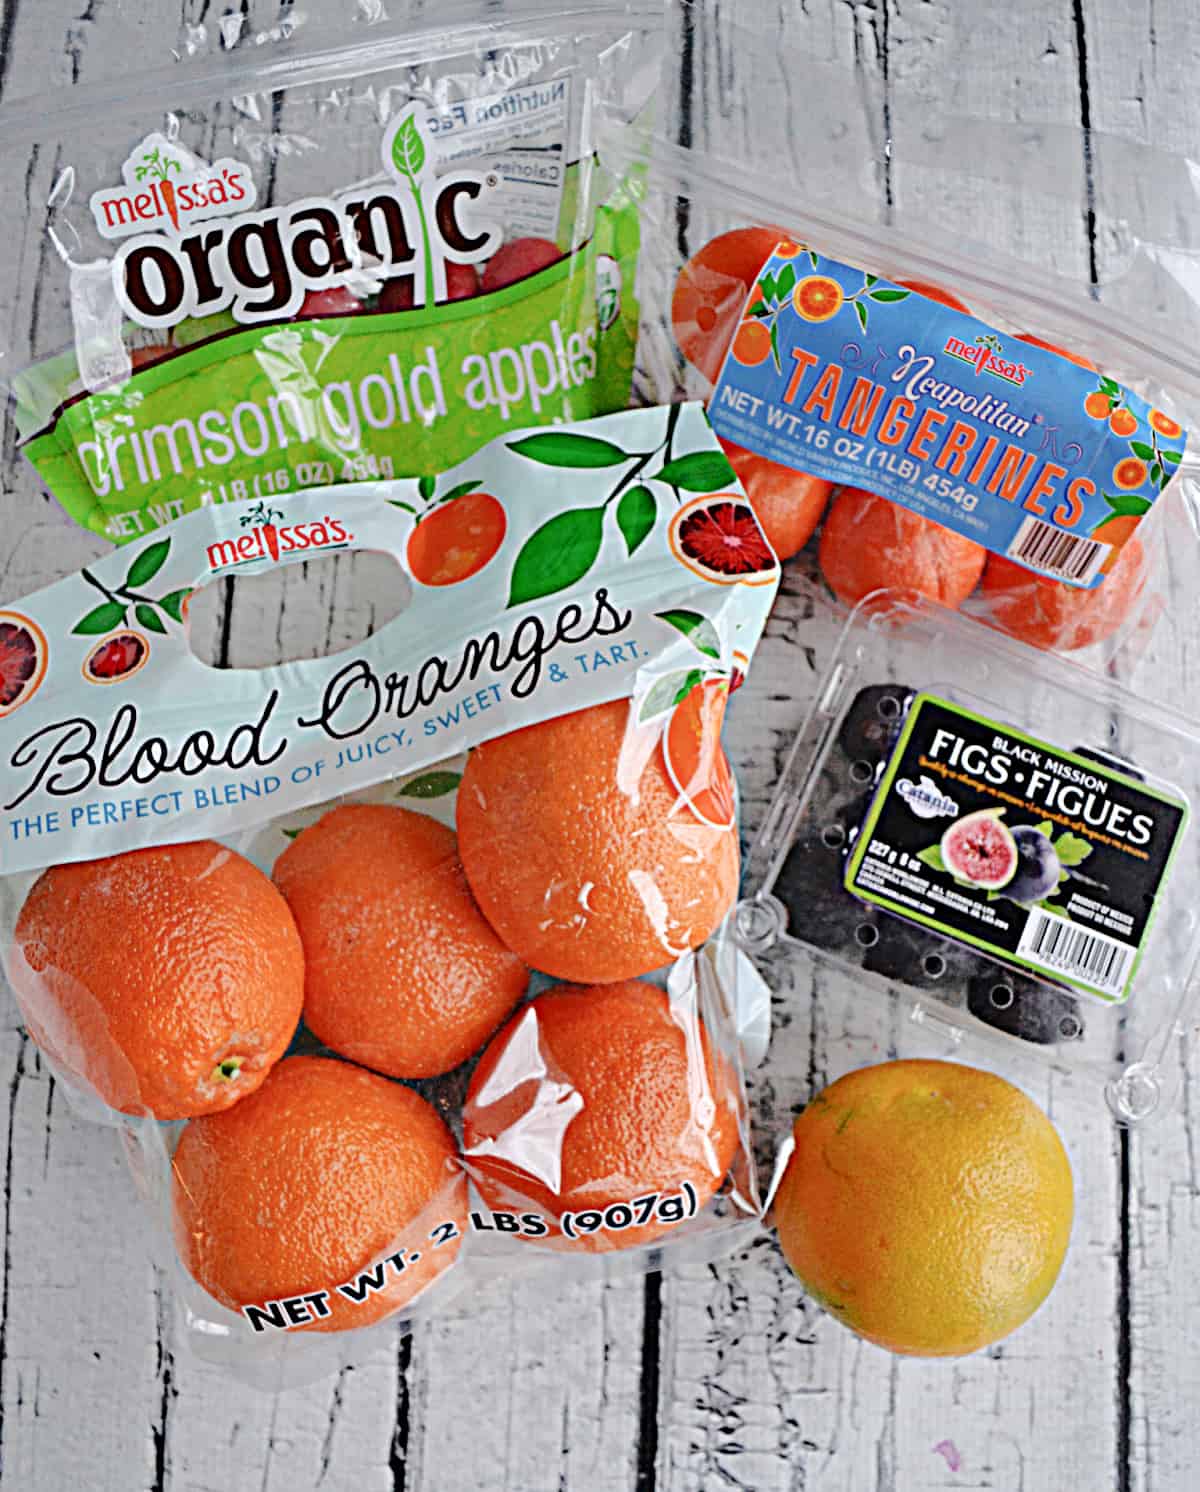 A bag of tangerines, oranges, apples, a package of figs, and a grapefruit.